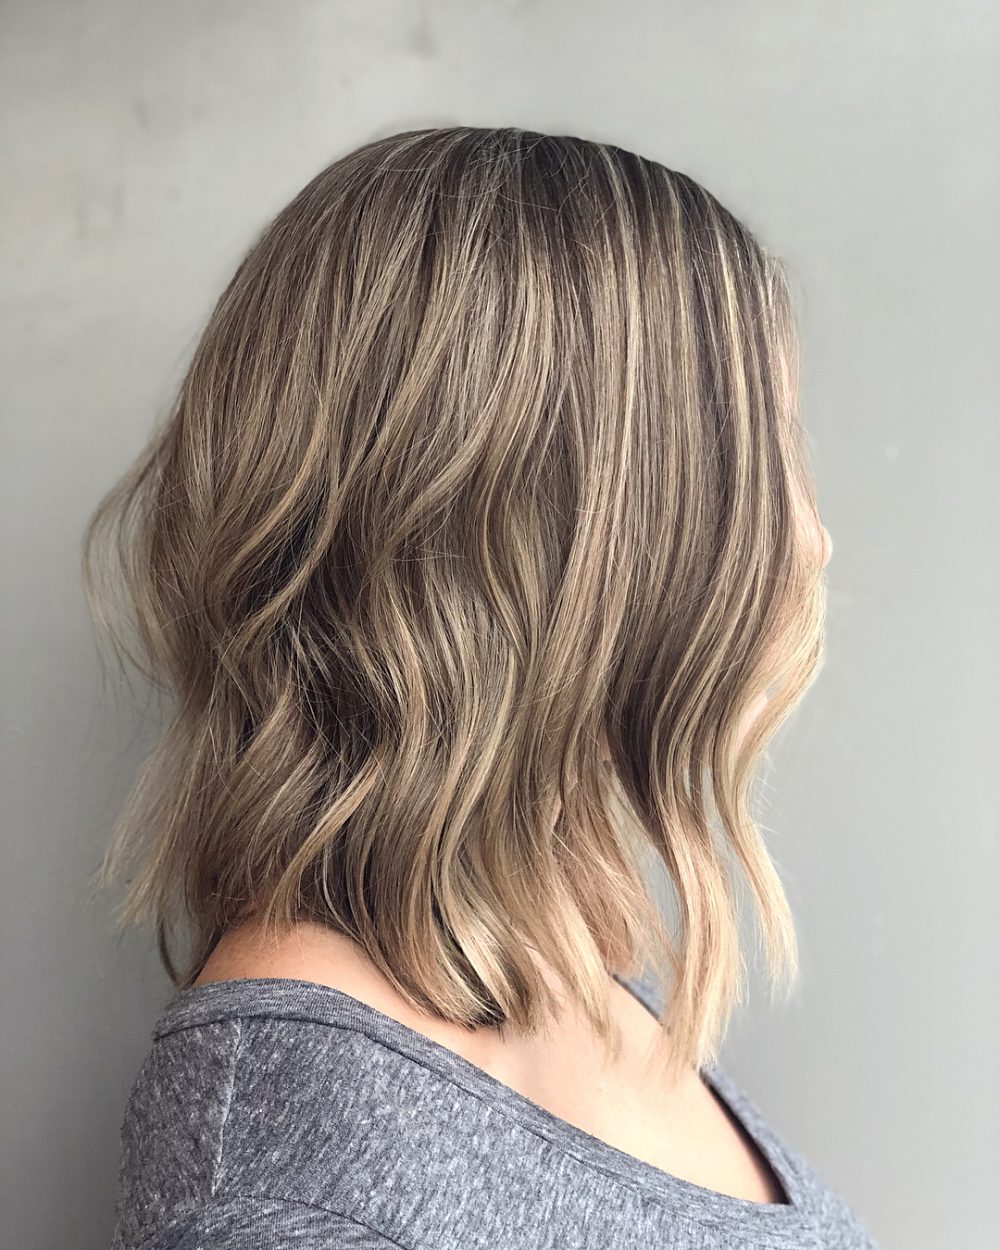 21 Best Long Layered Bob Layered Lob Hairstyles in 2021